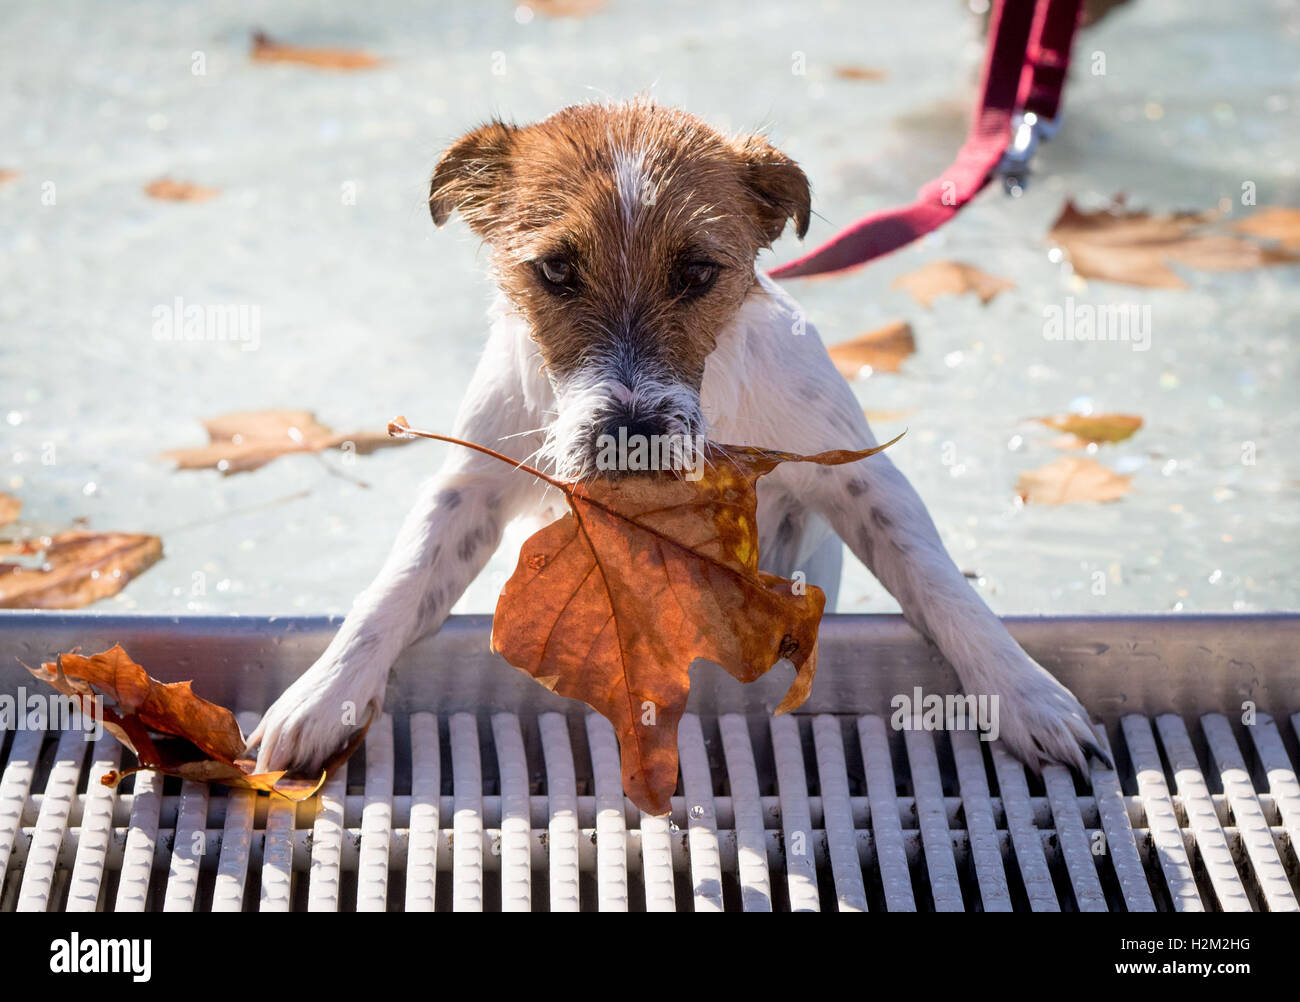 Frankfurt am Main, Germany. 29th September, 2016. Jack Russel Terrier Lucky fishes a fall leaf out of the water during the dog swim at the Silobad pool in Frankfurt am Main, Germany, 29 September 2016. After the season ends for human pool guests, dogs get the chance to splash around before the water is drained. Credit:  dpa picture alliance/Alamy Live News Stock Photo